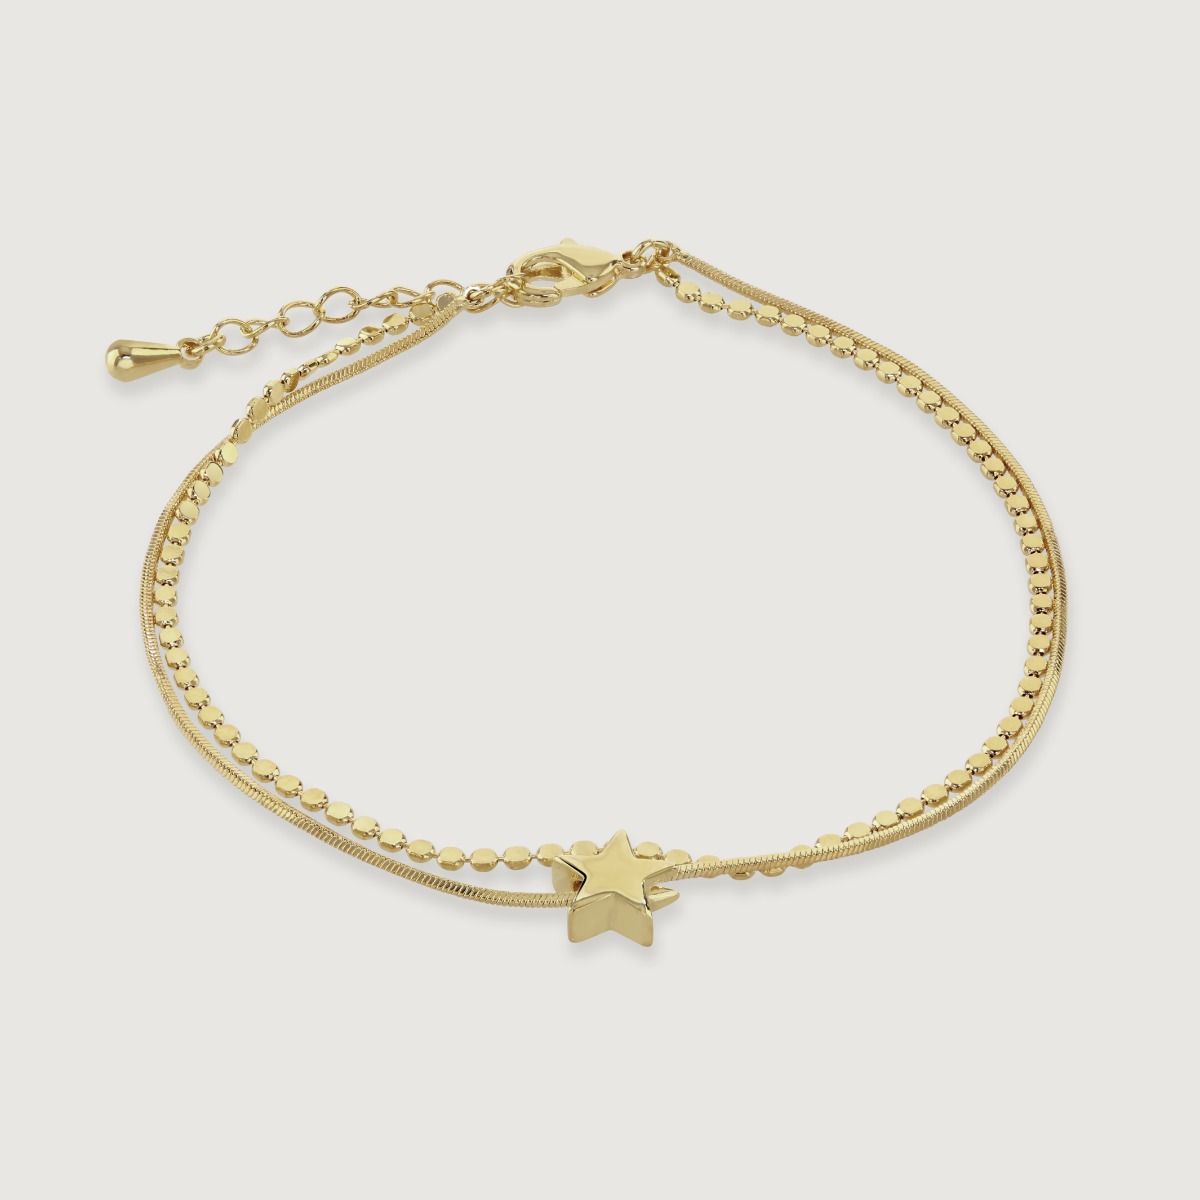 Elevate your style with this stunning double chain bracelet adorned with a star charm. Its delicate design adds a touch of celestial elegance to any outfit. Handcrafted with meticulous detail, it serves as a reminder to reach for the stars and embrace you